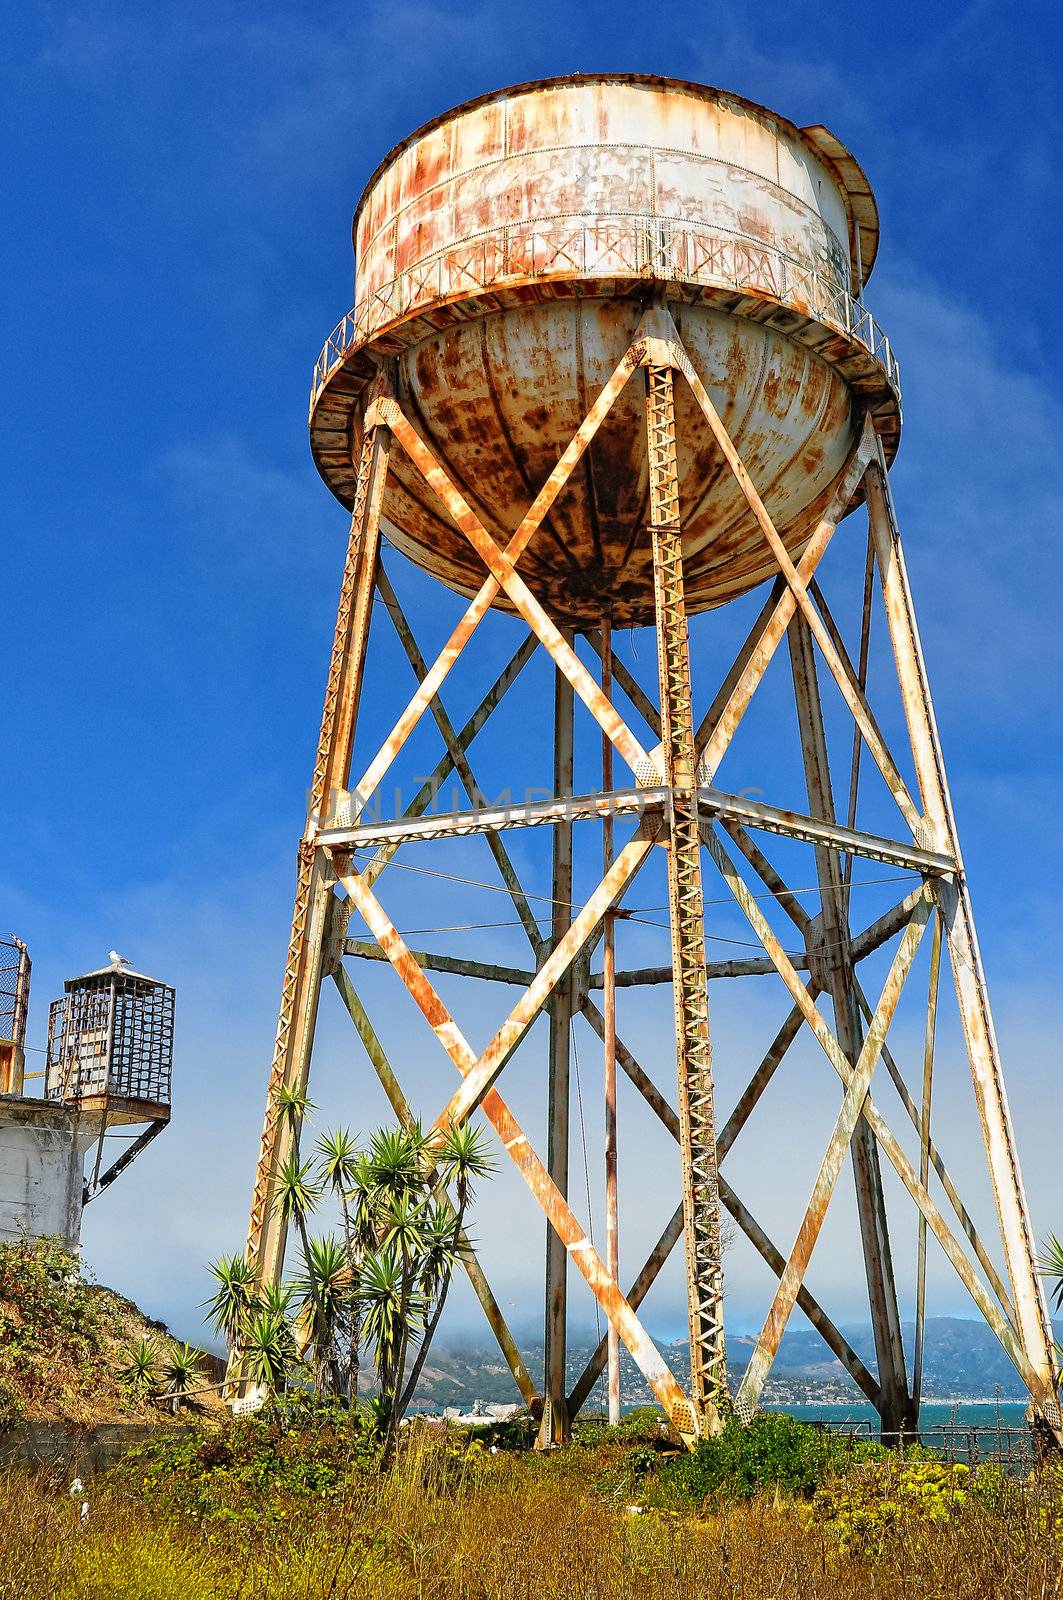 Rusty old water tank tower with blue sky background